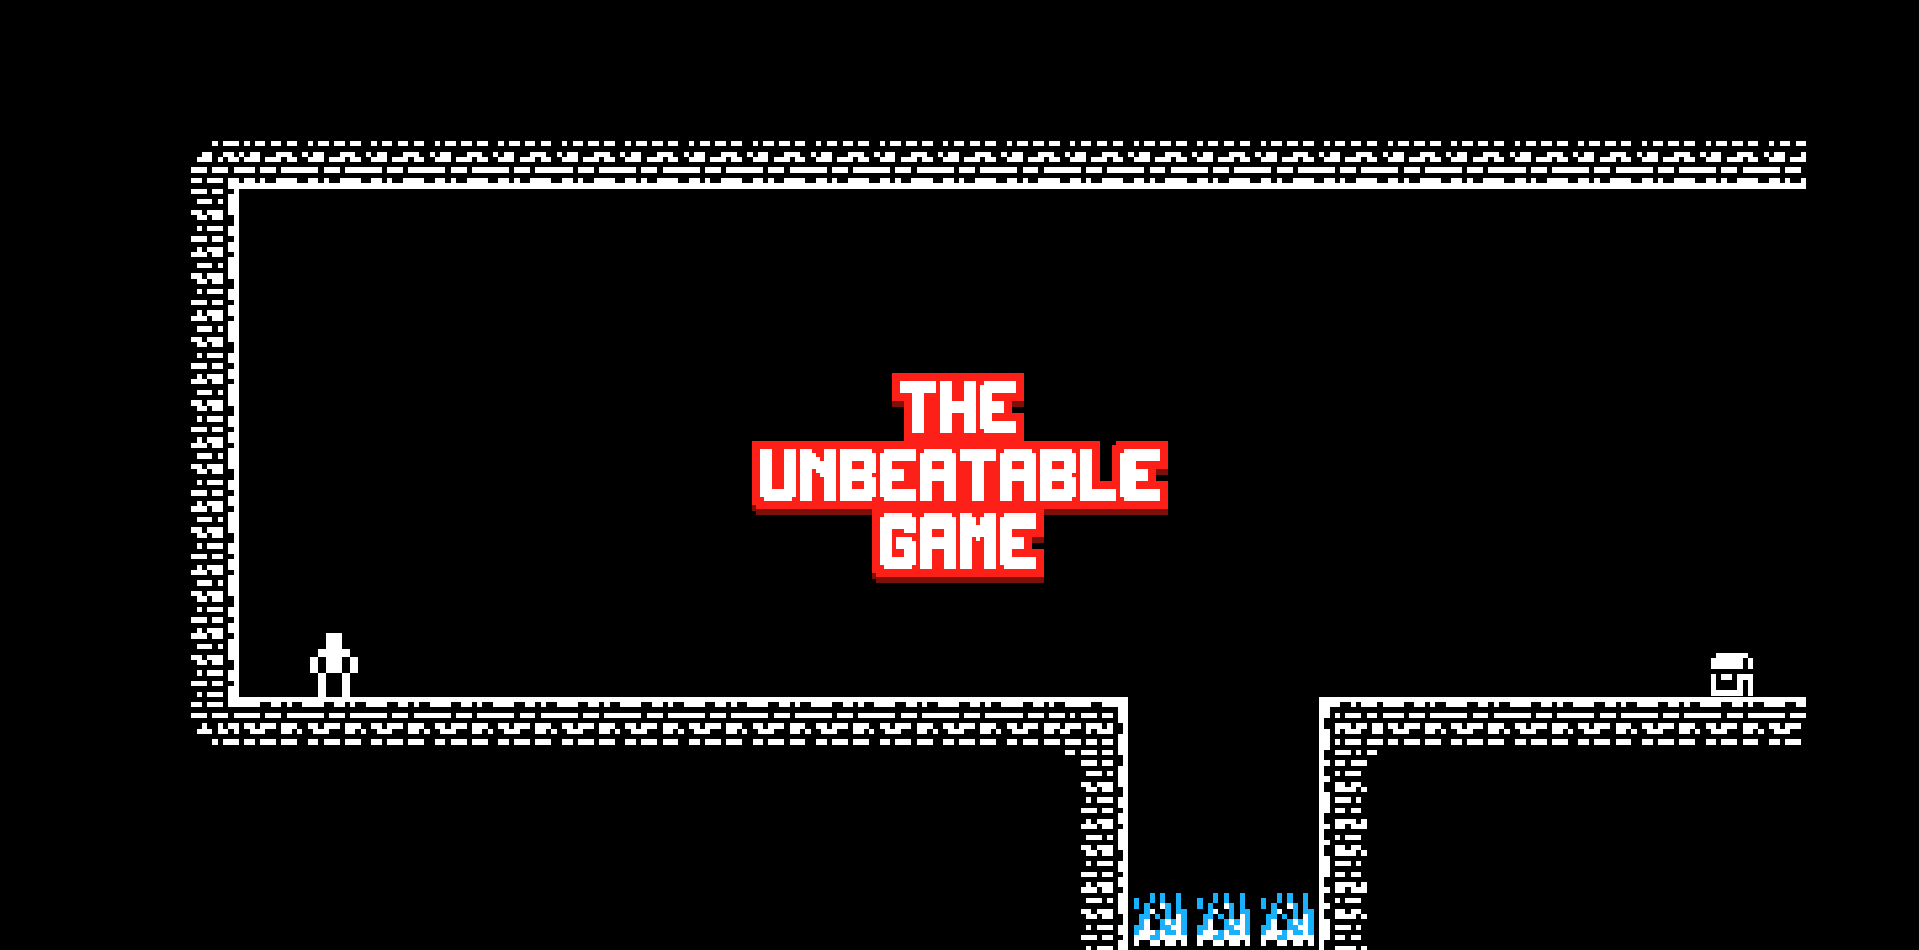 THE UNBEATABLE GAME